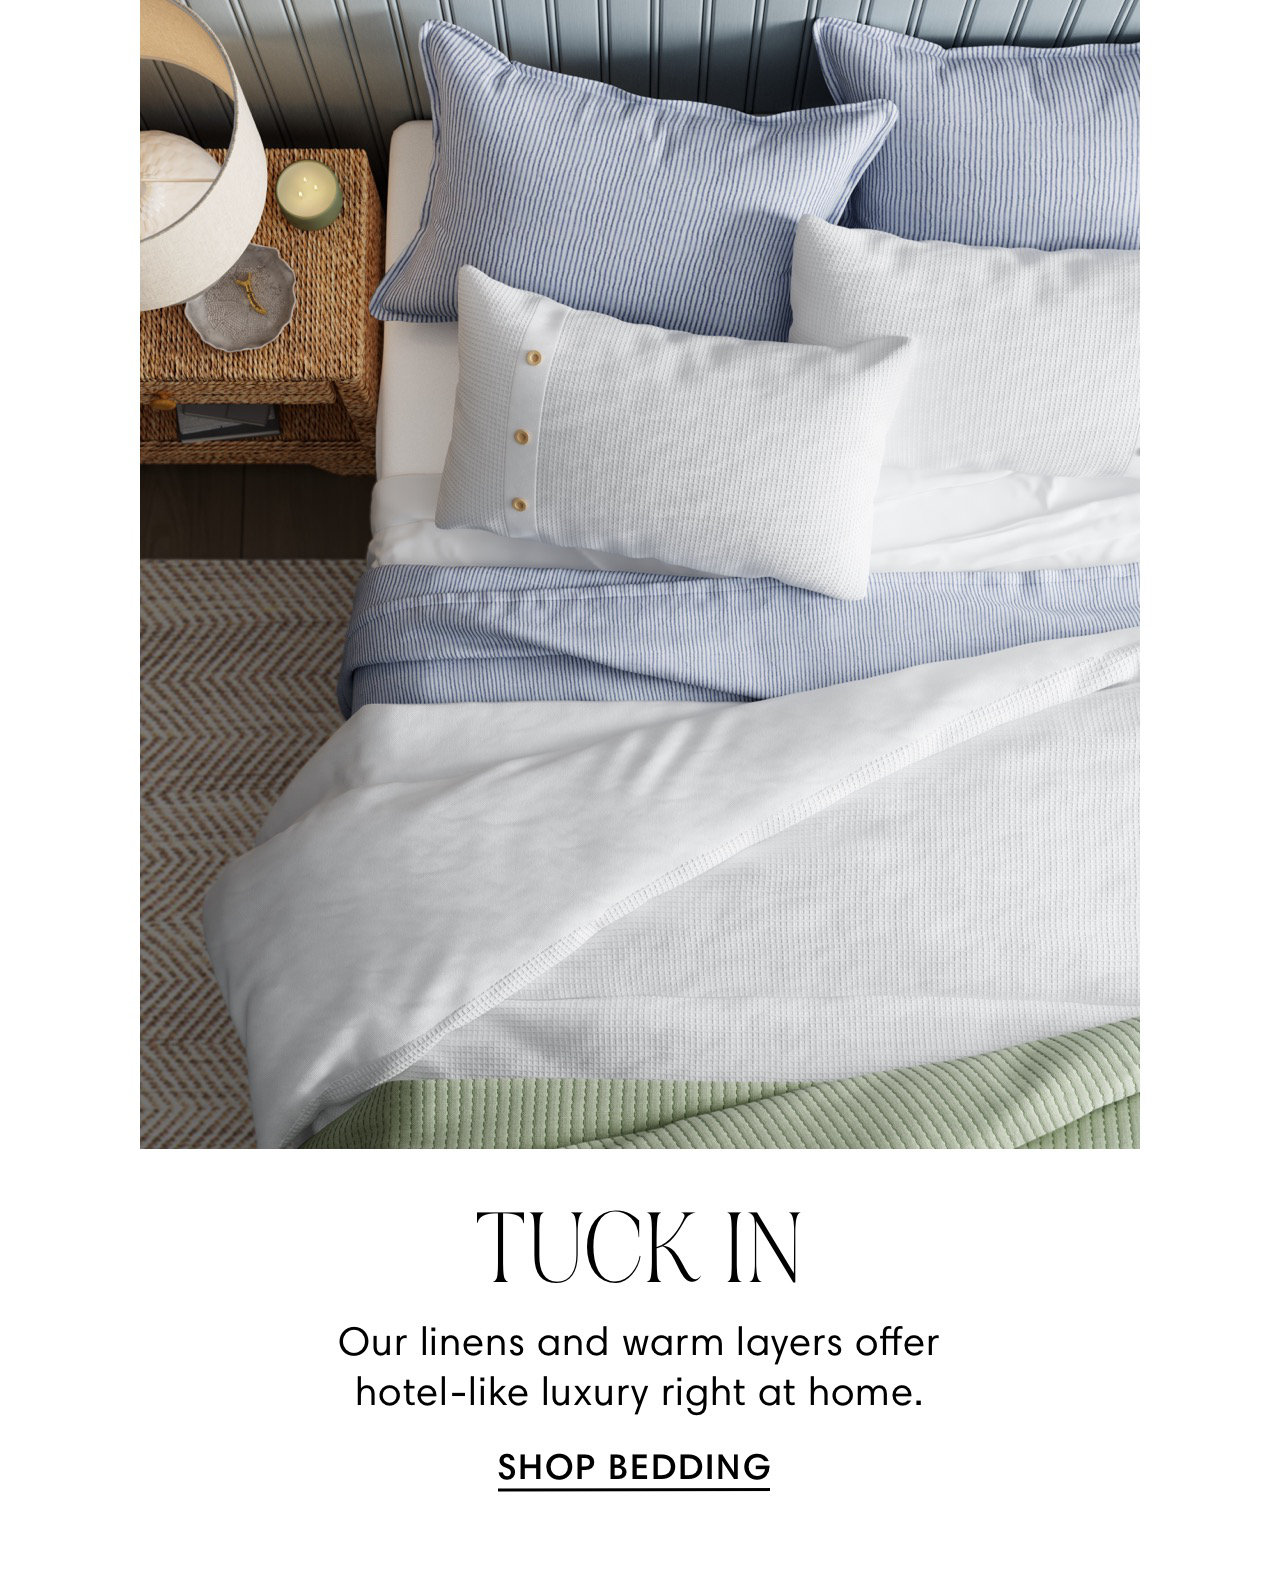 il i Illllllm,u; o N L p TUCK IN Our linens and warm layers offer hotel-like luxury right at home. SHOP BEDDING 